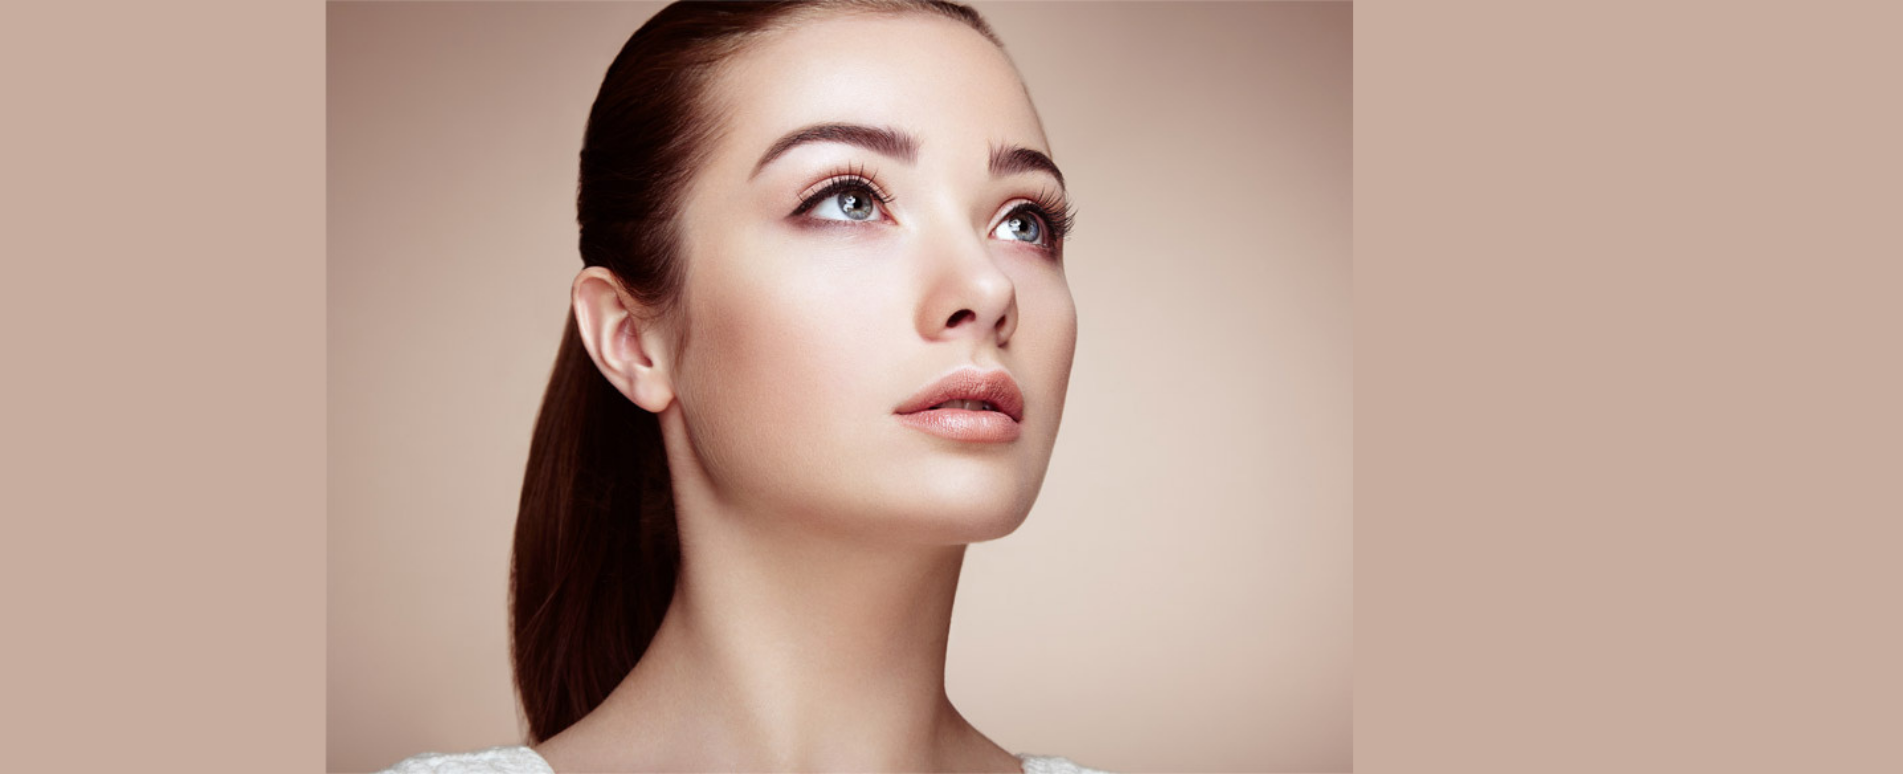 Professional Aesthetic Treatments by Leading Experts